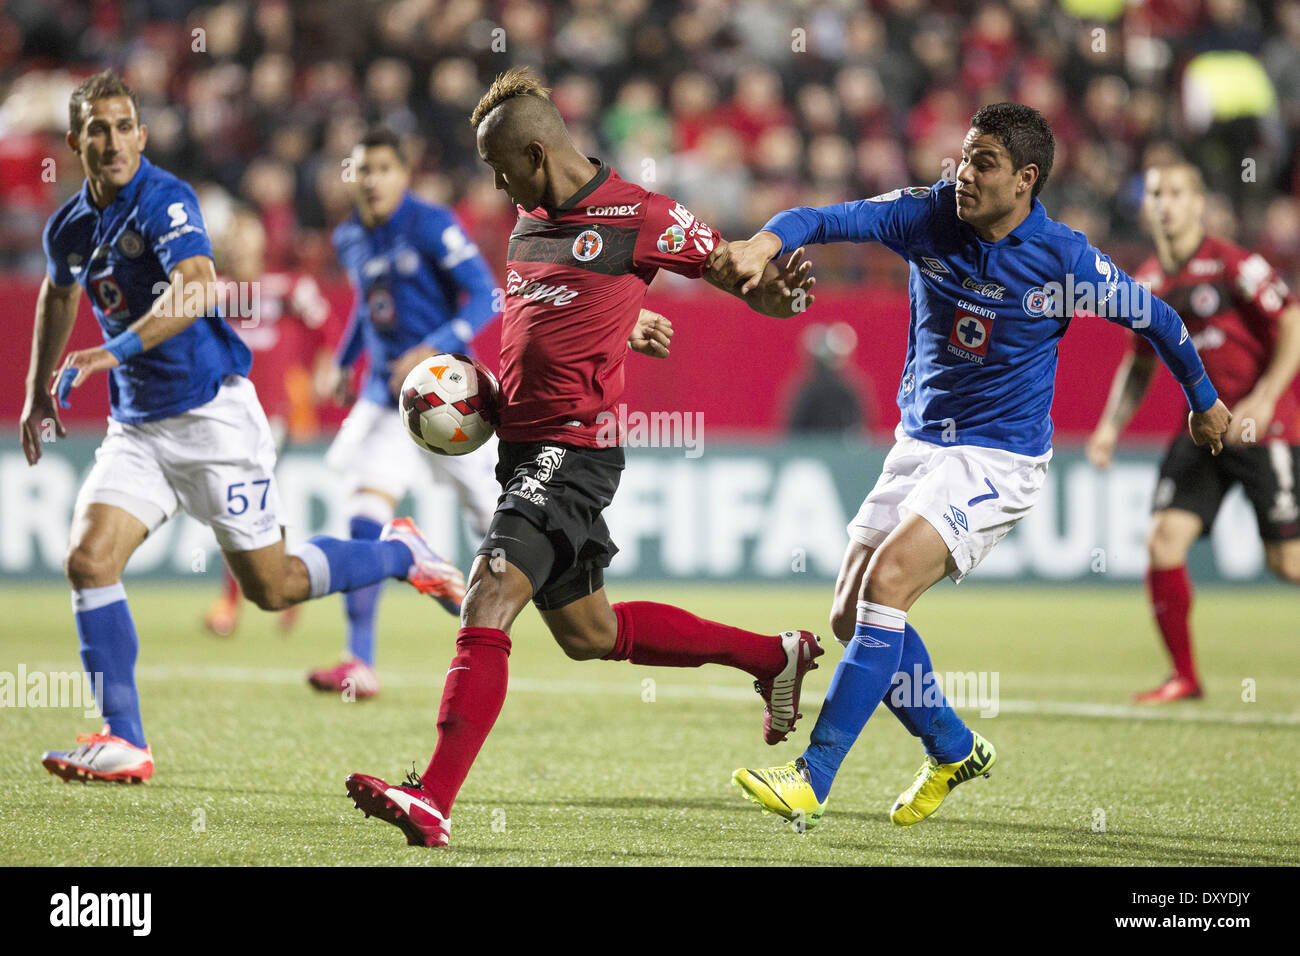 Tijuana, Mexico. 1st Apr, 2014. Tijuana's Fidel Martinez (C) vies with Pablo Barrera (R) of Cruz Azul during the first leg of the CONCACAF Champions League semifinal at the Caliente Stadium in Tijuana, Mexico, April 1, 2014. © Guillermo Arias/Xinhua/Alamy Live News Stock Photo